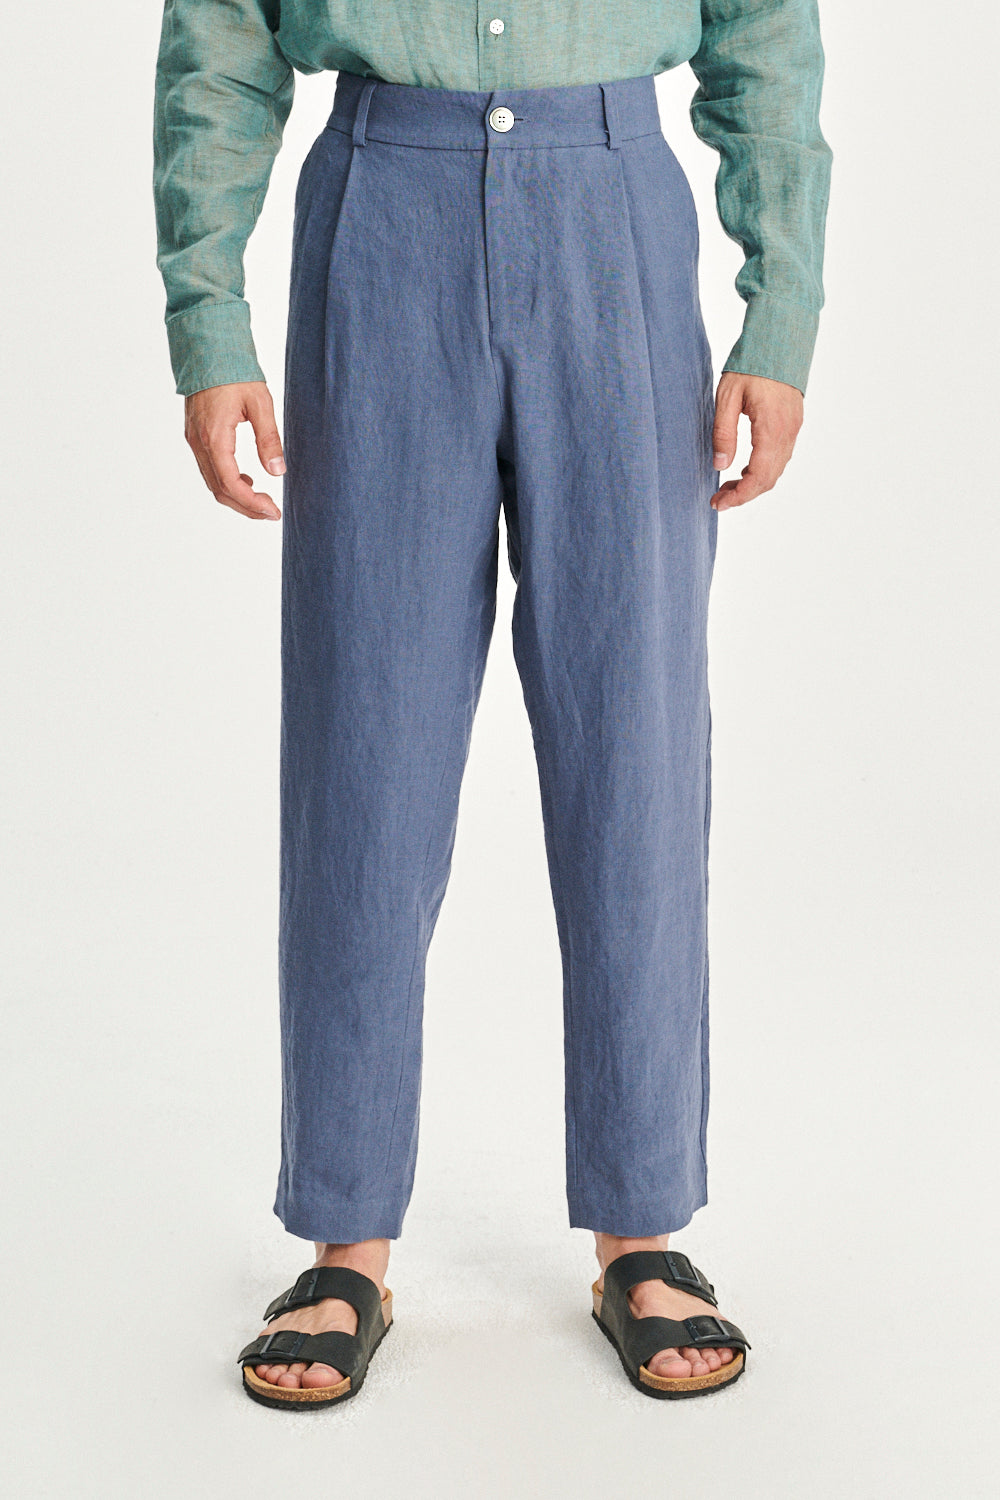 Genuine Trousers in a Police Blue Fine Sustainable Belgian Linen